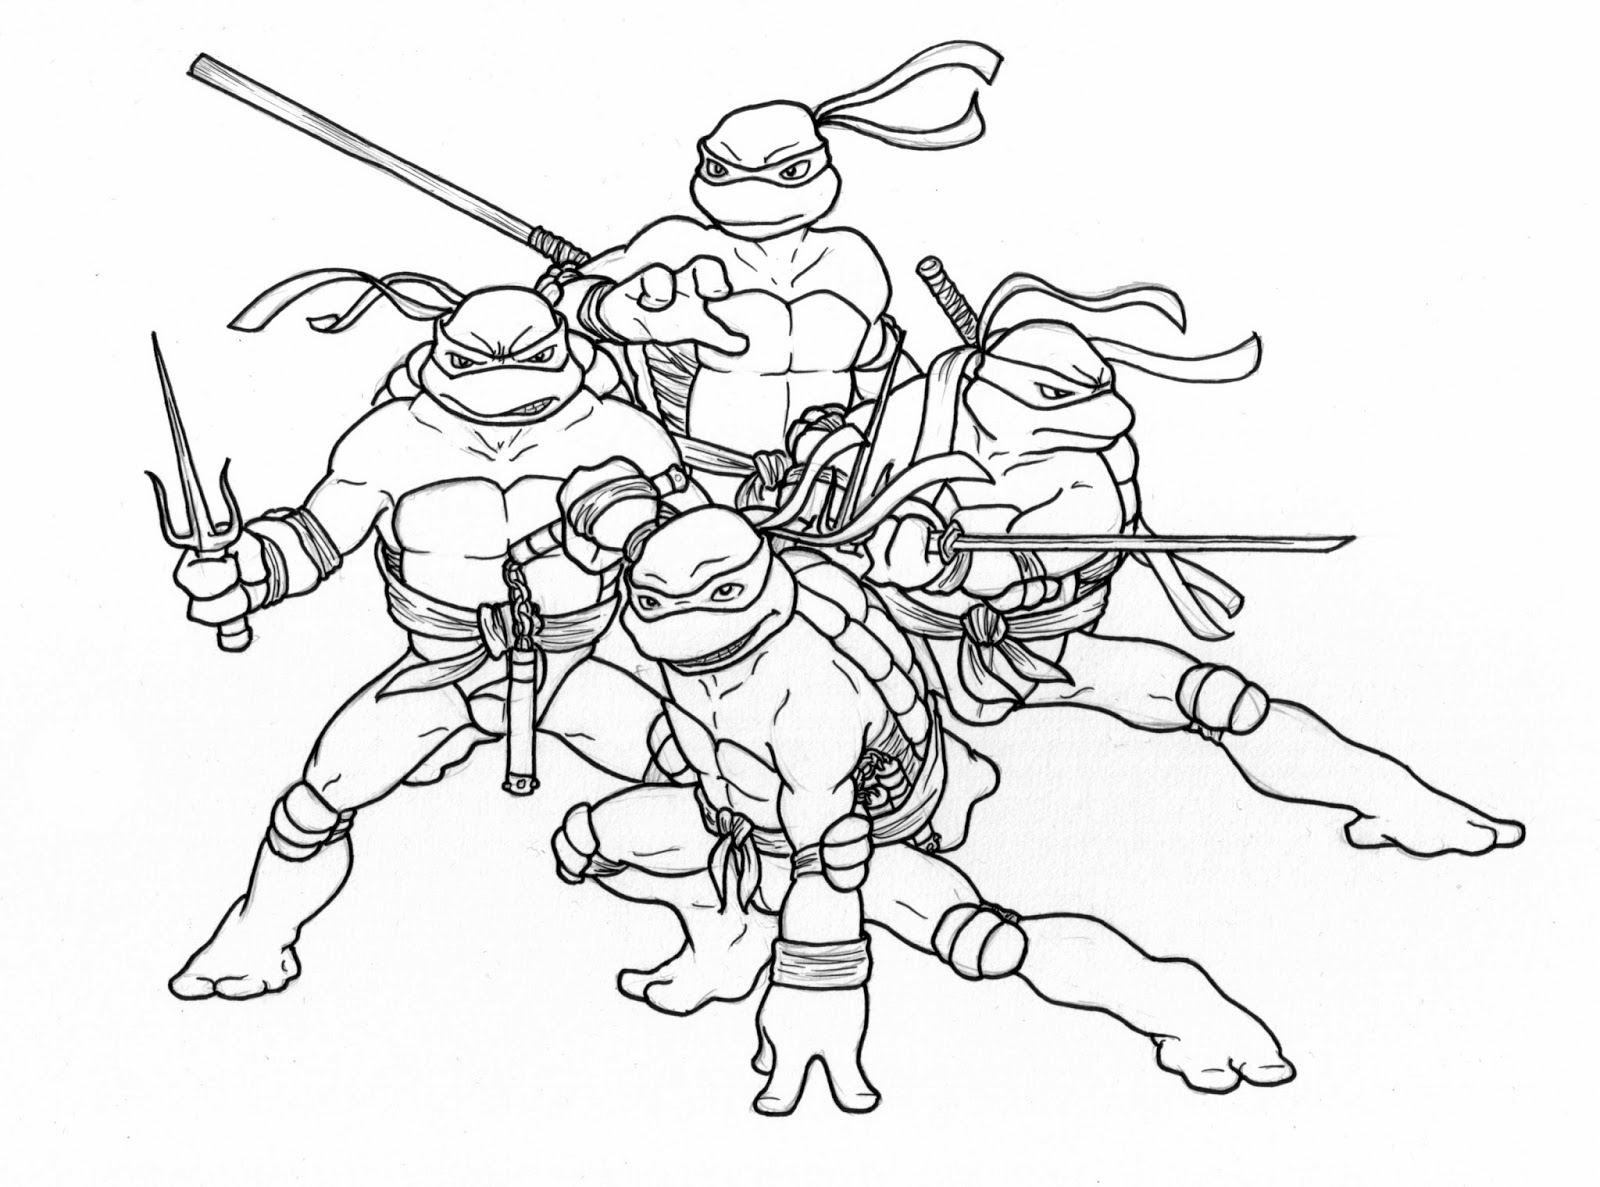 Free Coloring Pages Of 2014 Ninja Turtles Effy Moom Free Coloring Picture wallpaper give a chance to color on the wall without getting in trouble! Fill the walls of your home or office with stress-relieving [effymoom.blogspot.com]